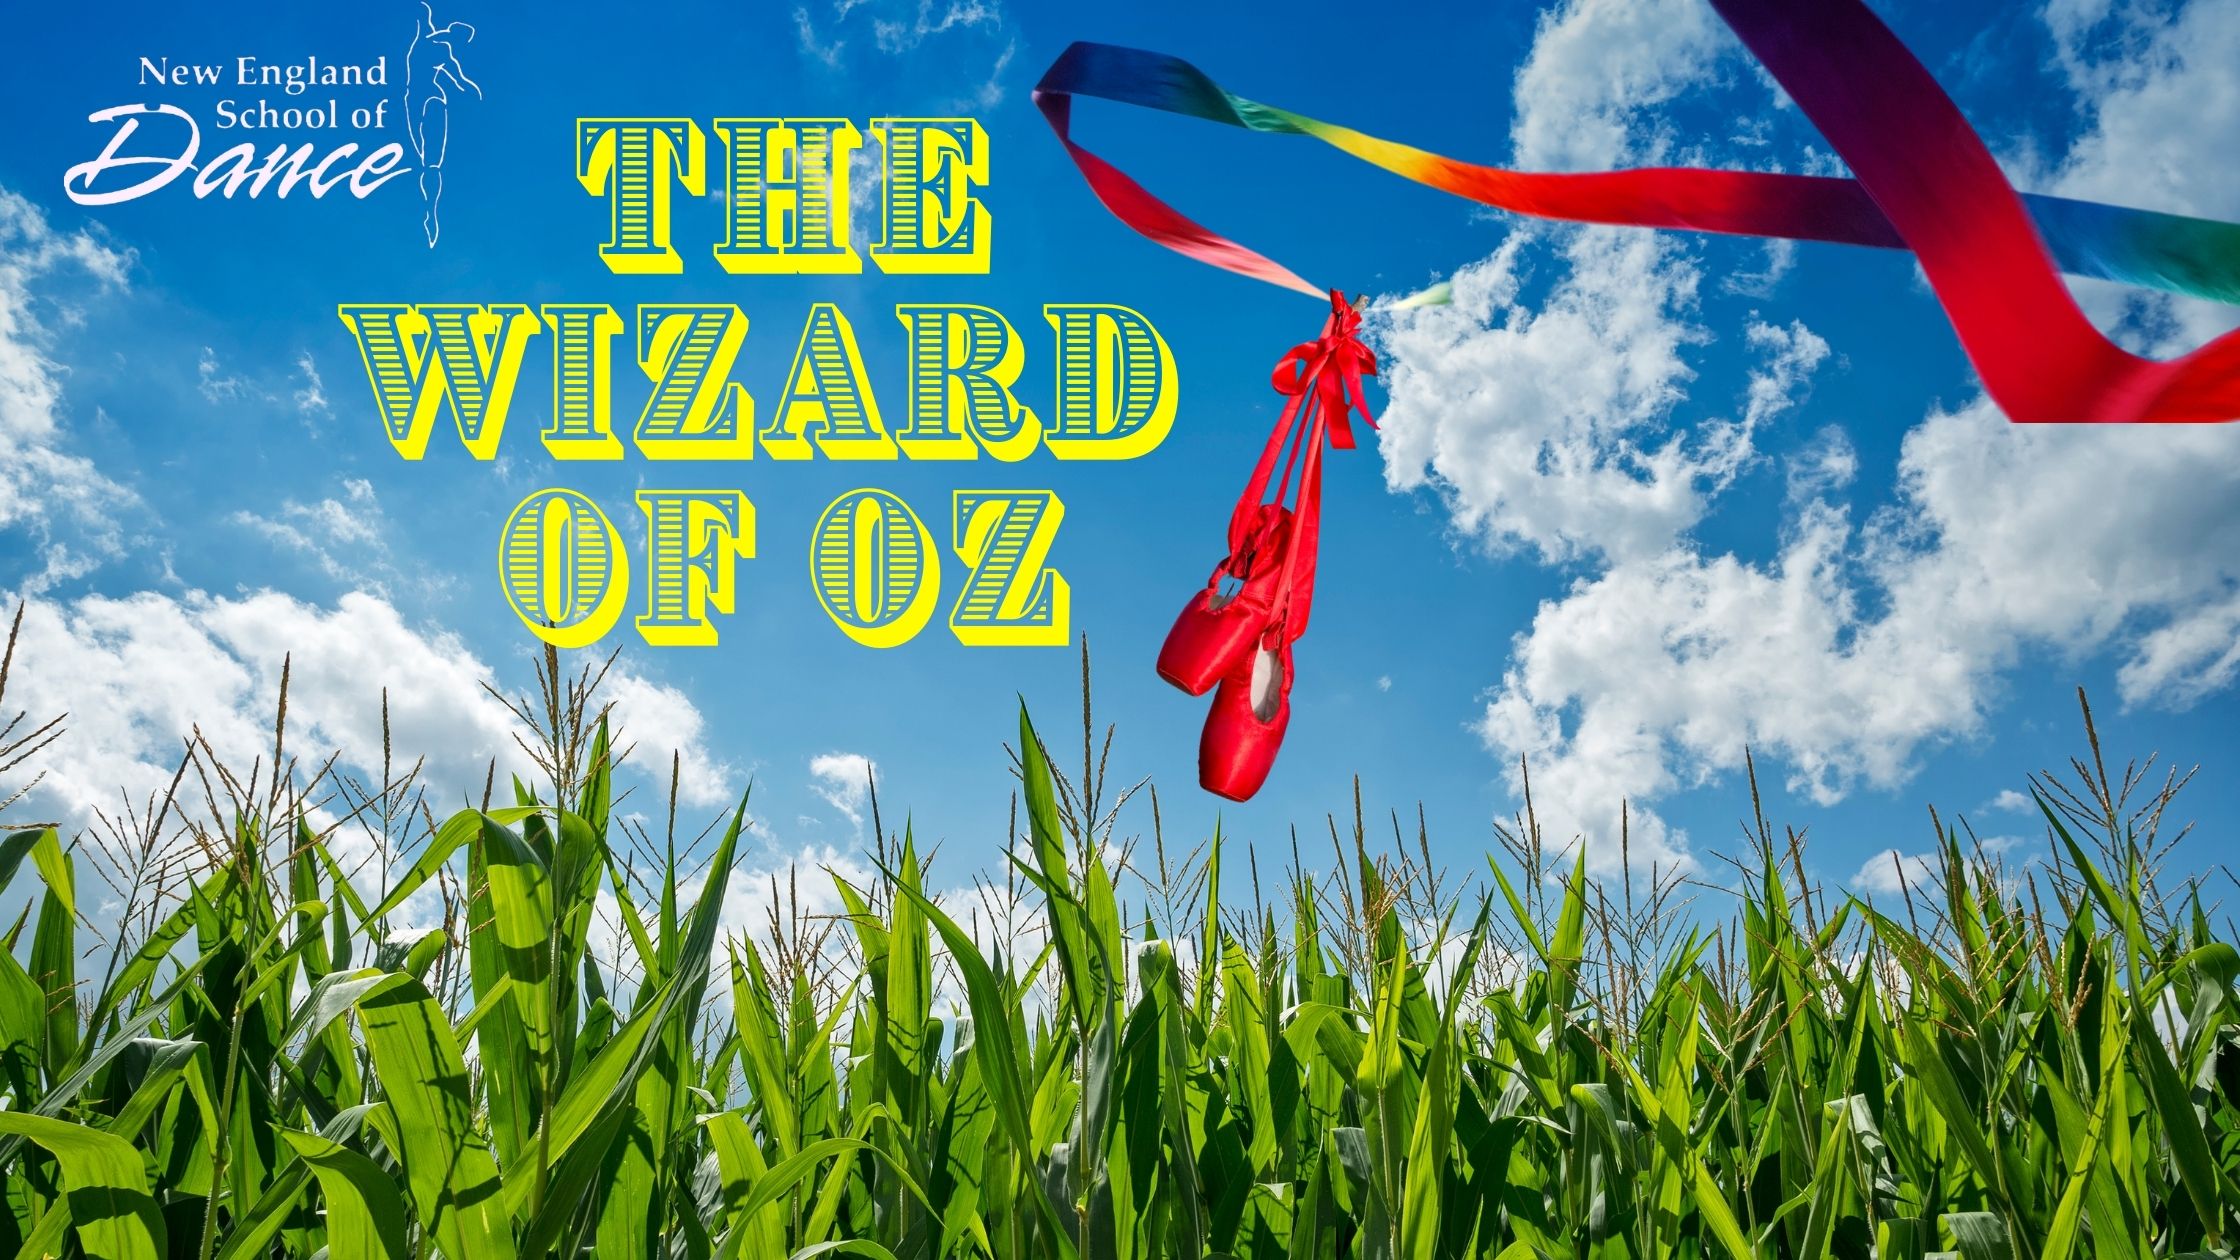 New England School of Dance Presents: The Wizard of Oz